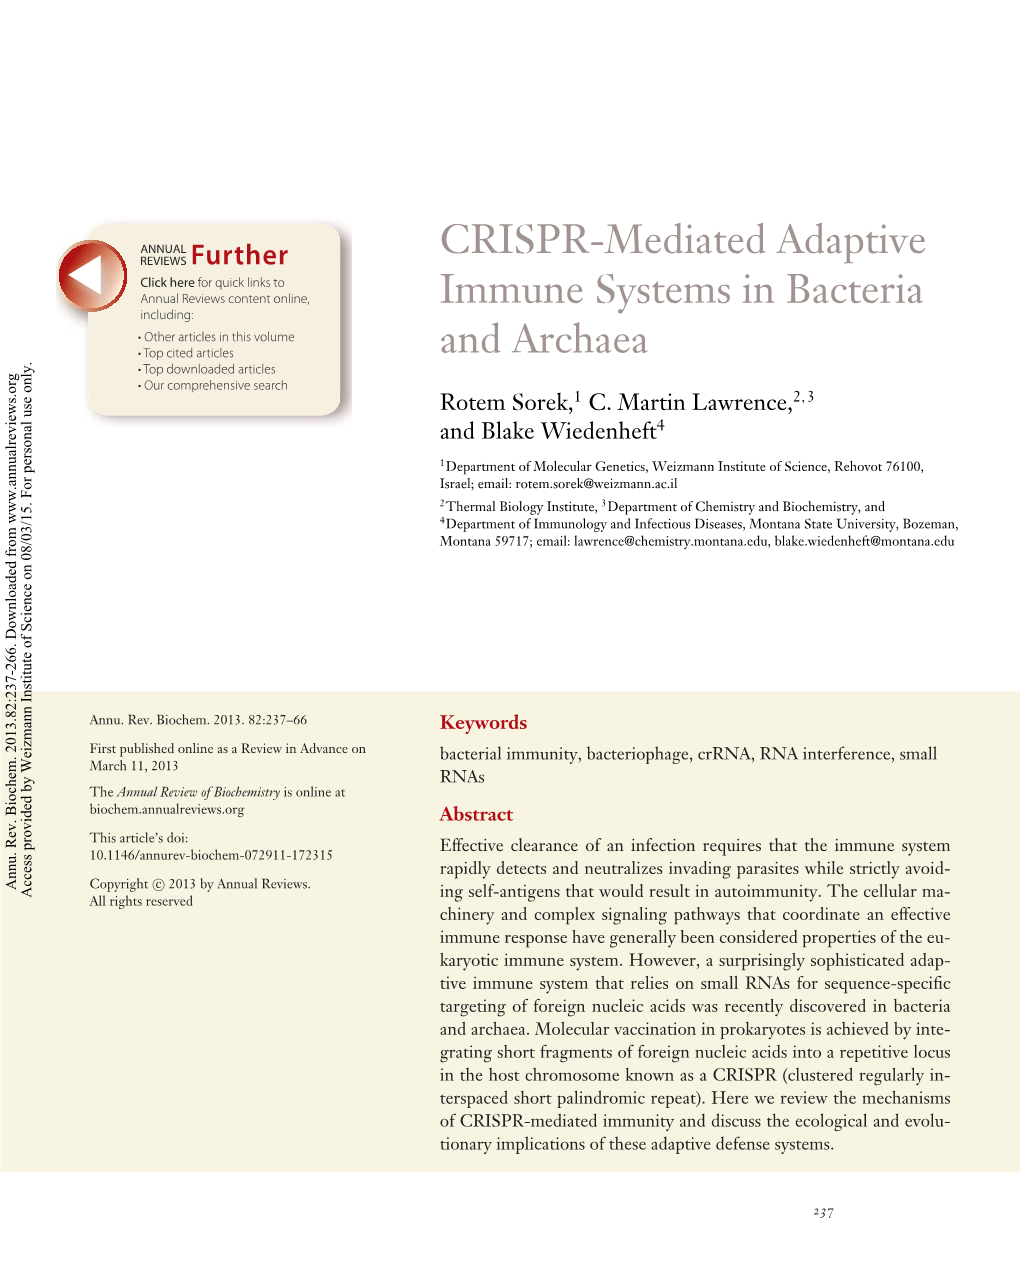 CRISPR-Mediated Adaptive Immune Systems in Bacteria and Archaea